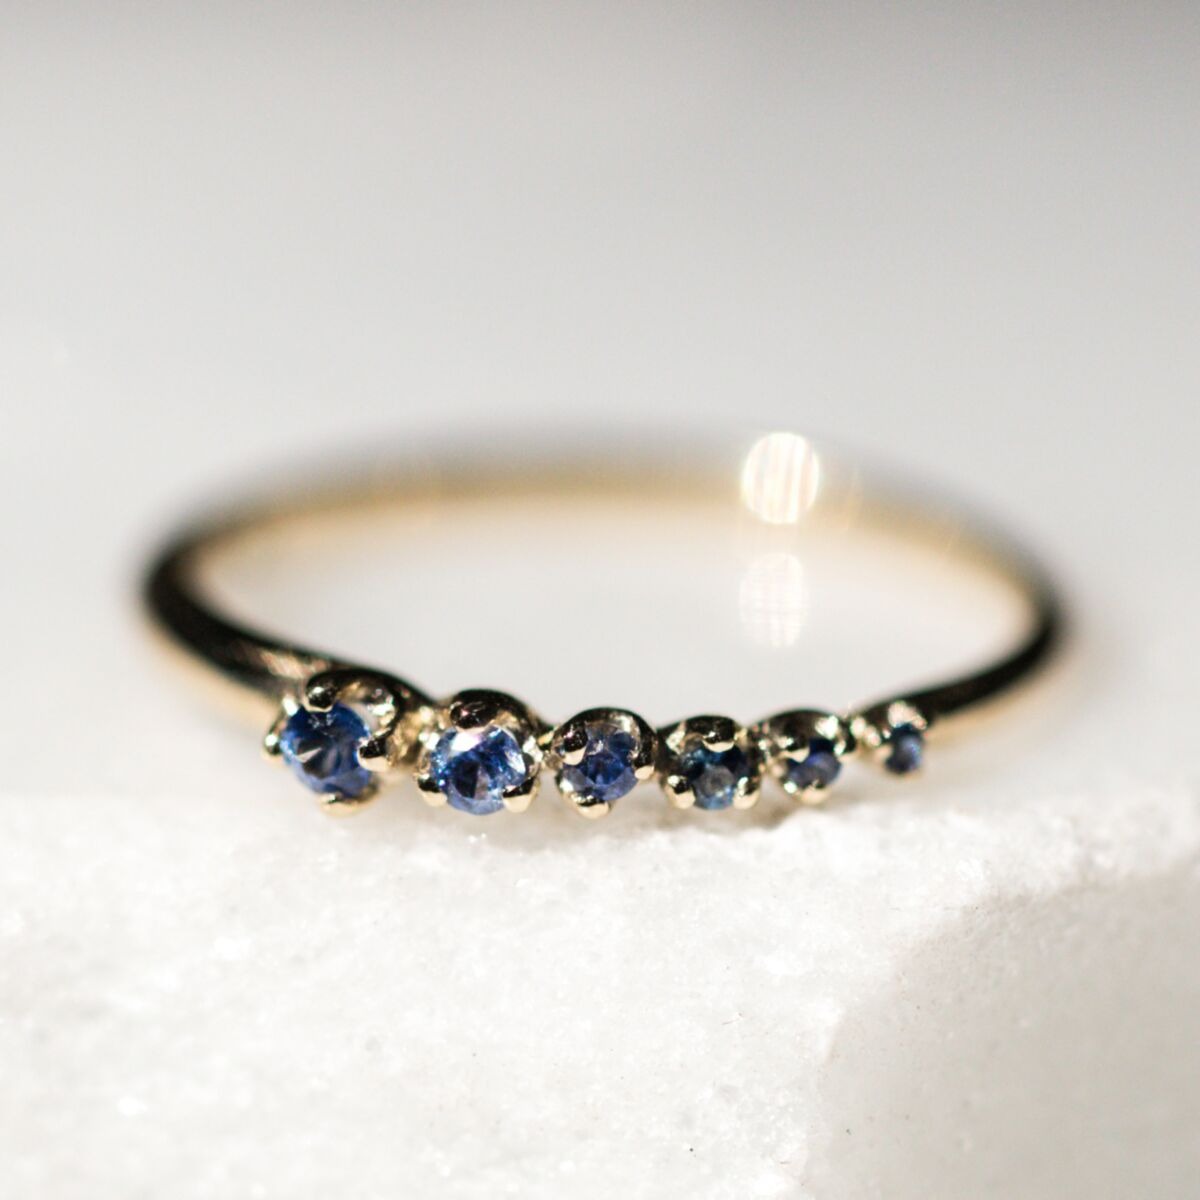 non diamond engagement ring with six small sapphires lined up from largest to smallest